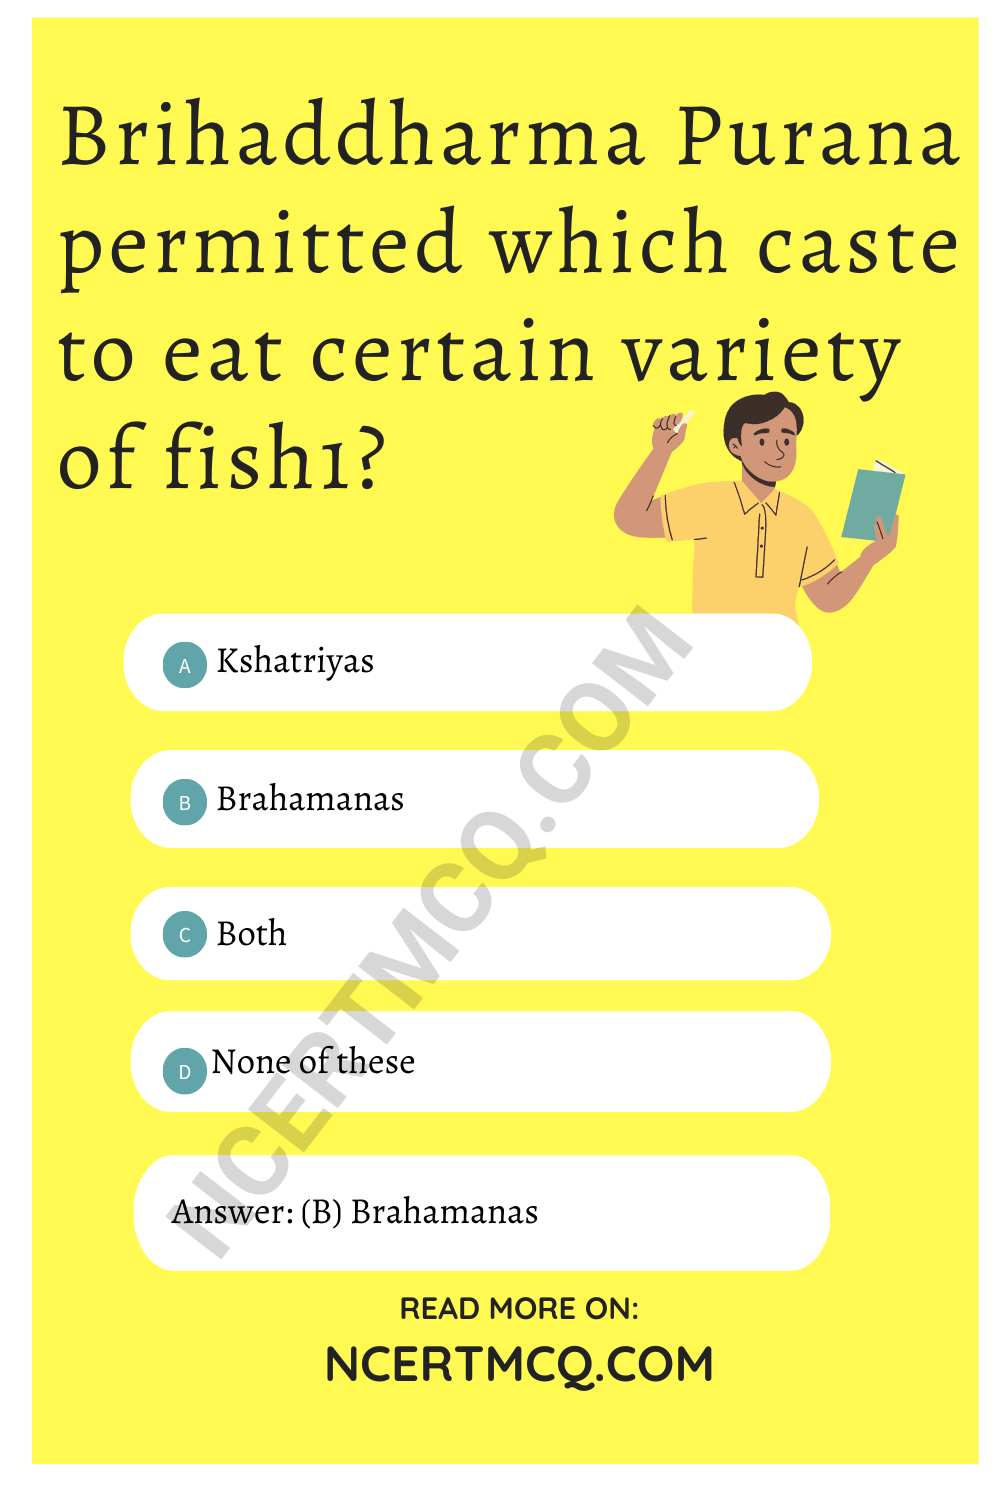 Brihaddharma Purana permitted which caste to eat certain variety of fish1?